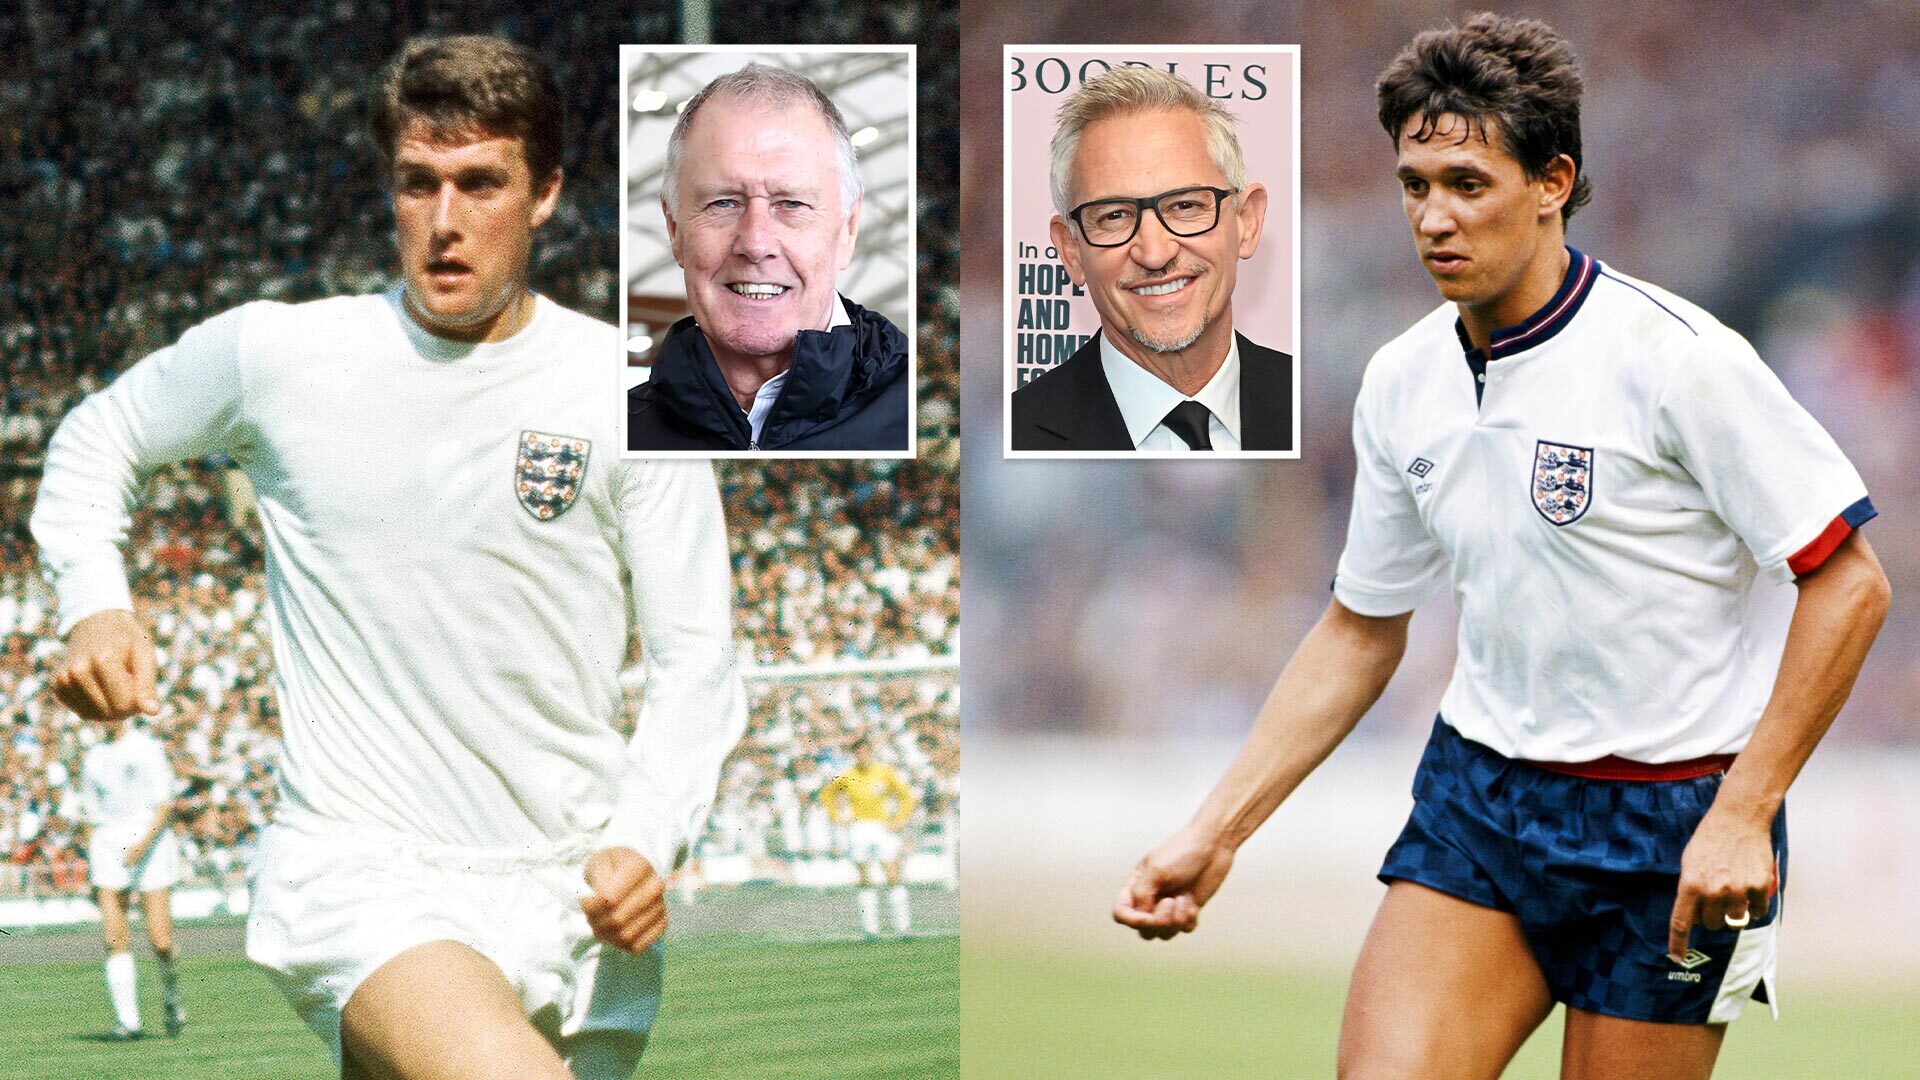 Sir Geoff Hurst & Gary Lineker return to Sun campaign for flu jabs and Covid boosters before the World Cup